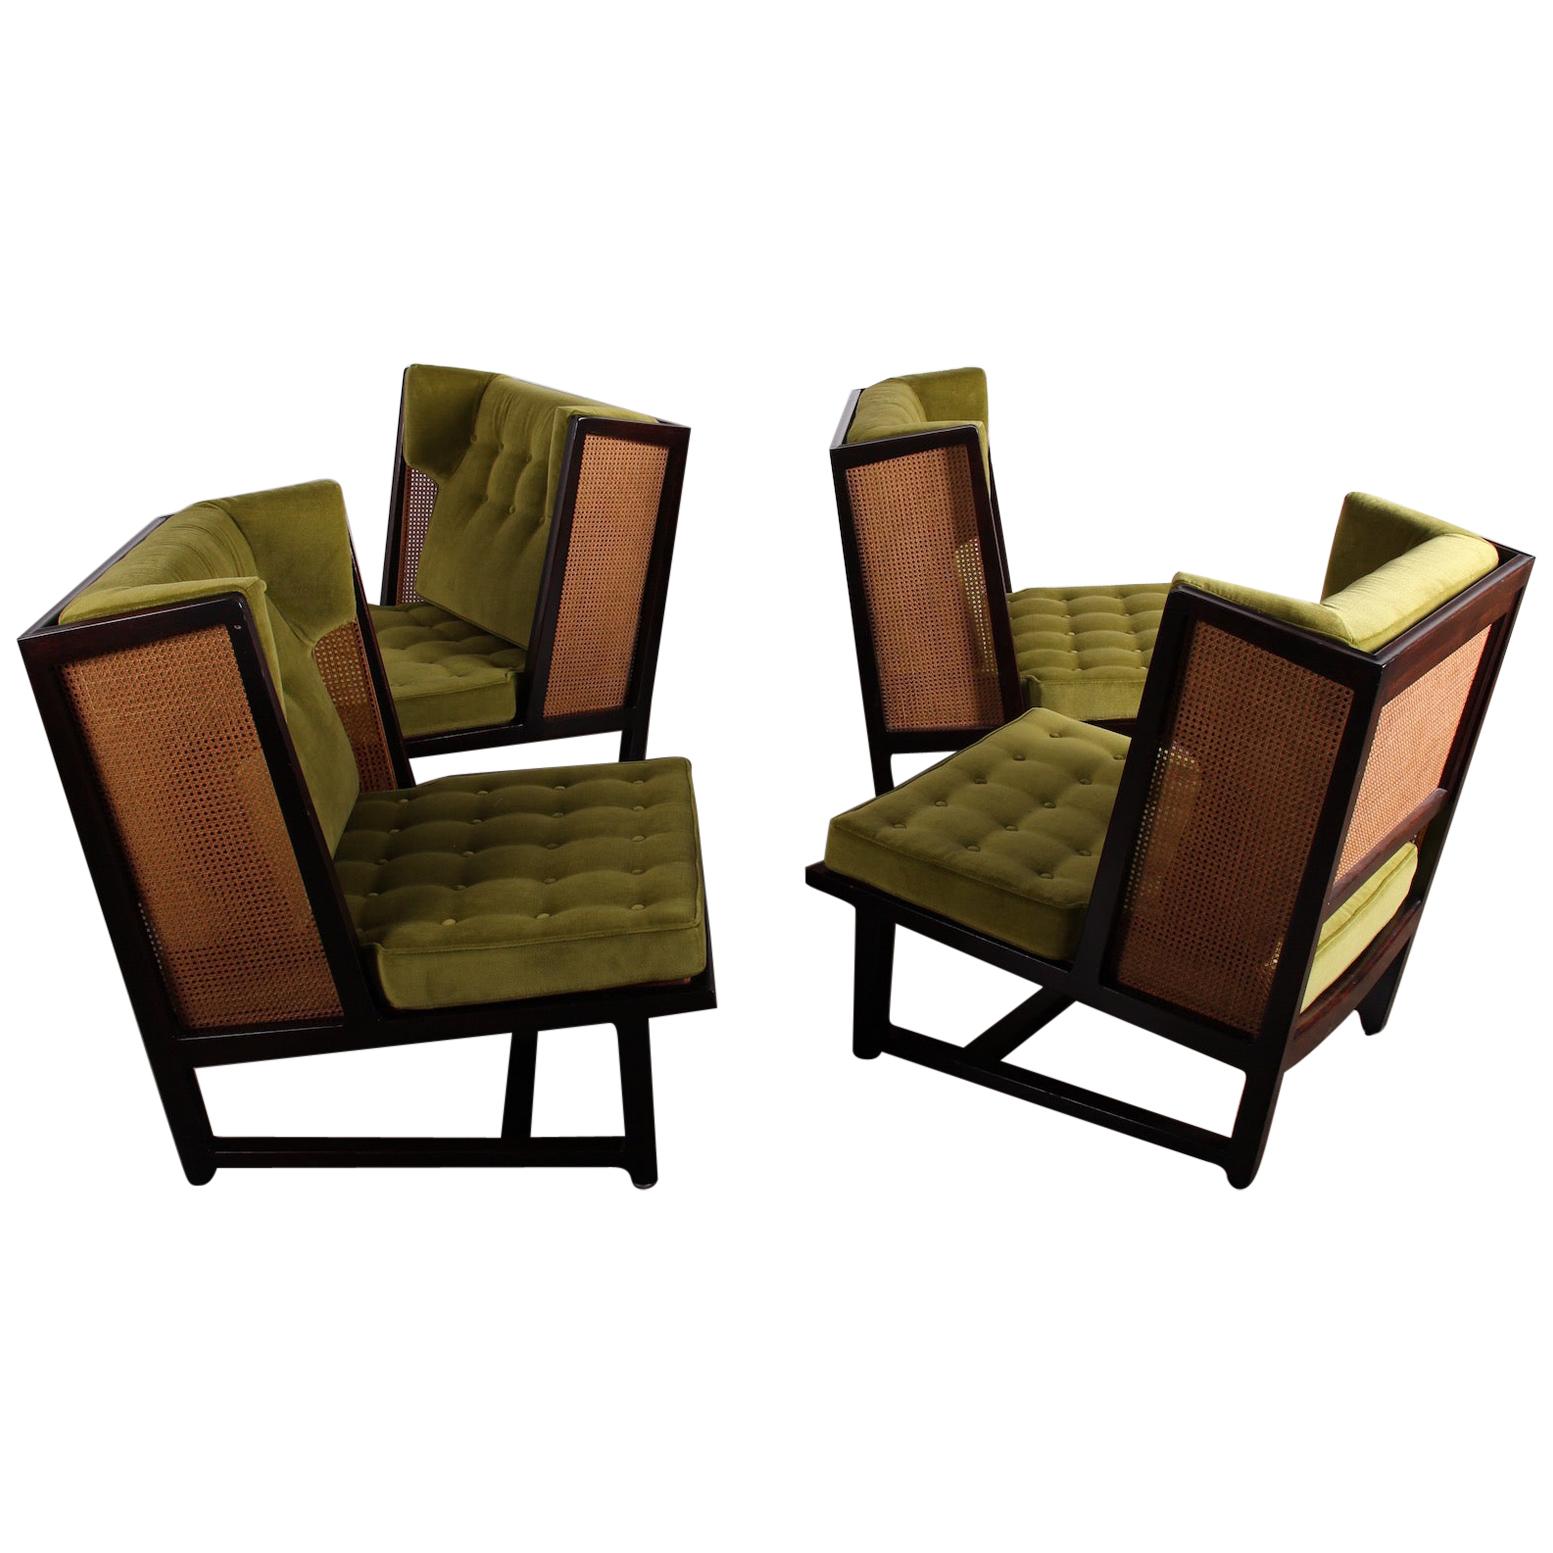 Four Cane Back Wing Chairs by Edward Wormley for Dunbar